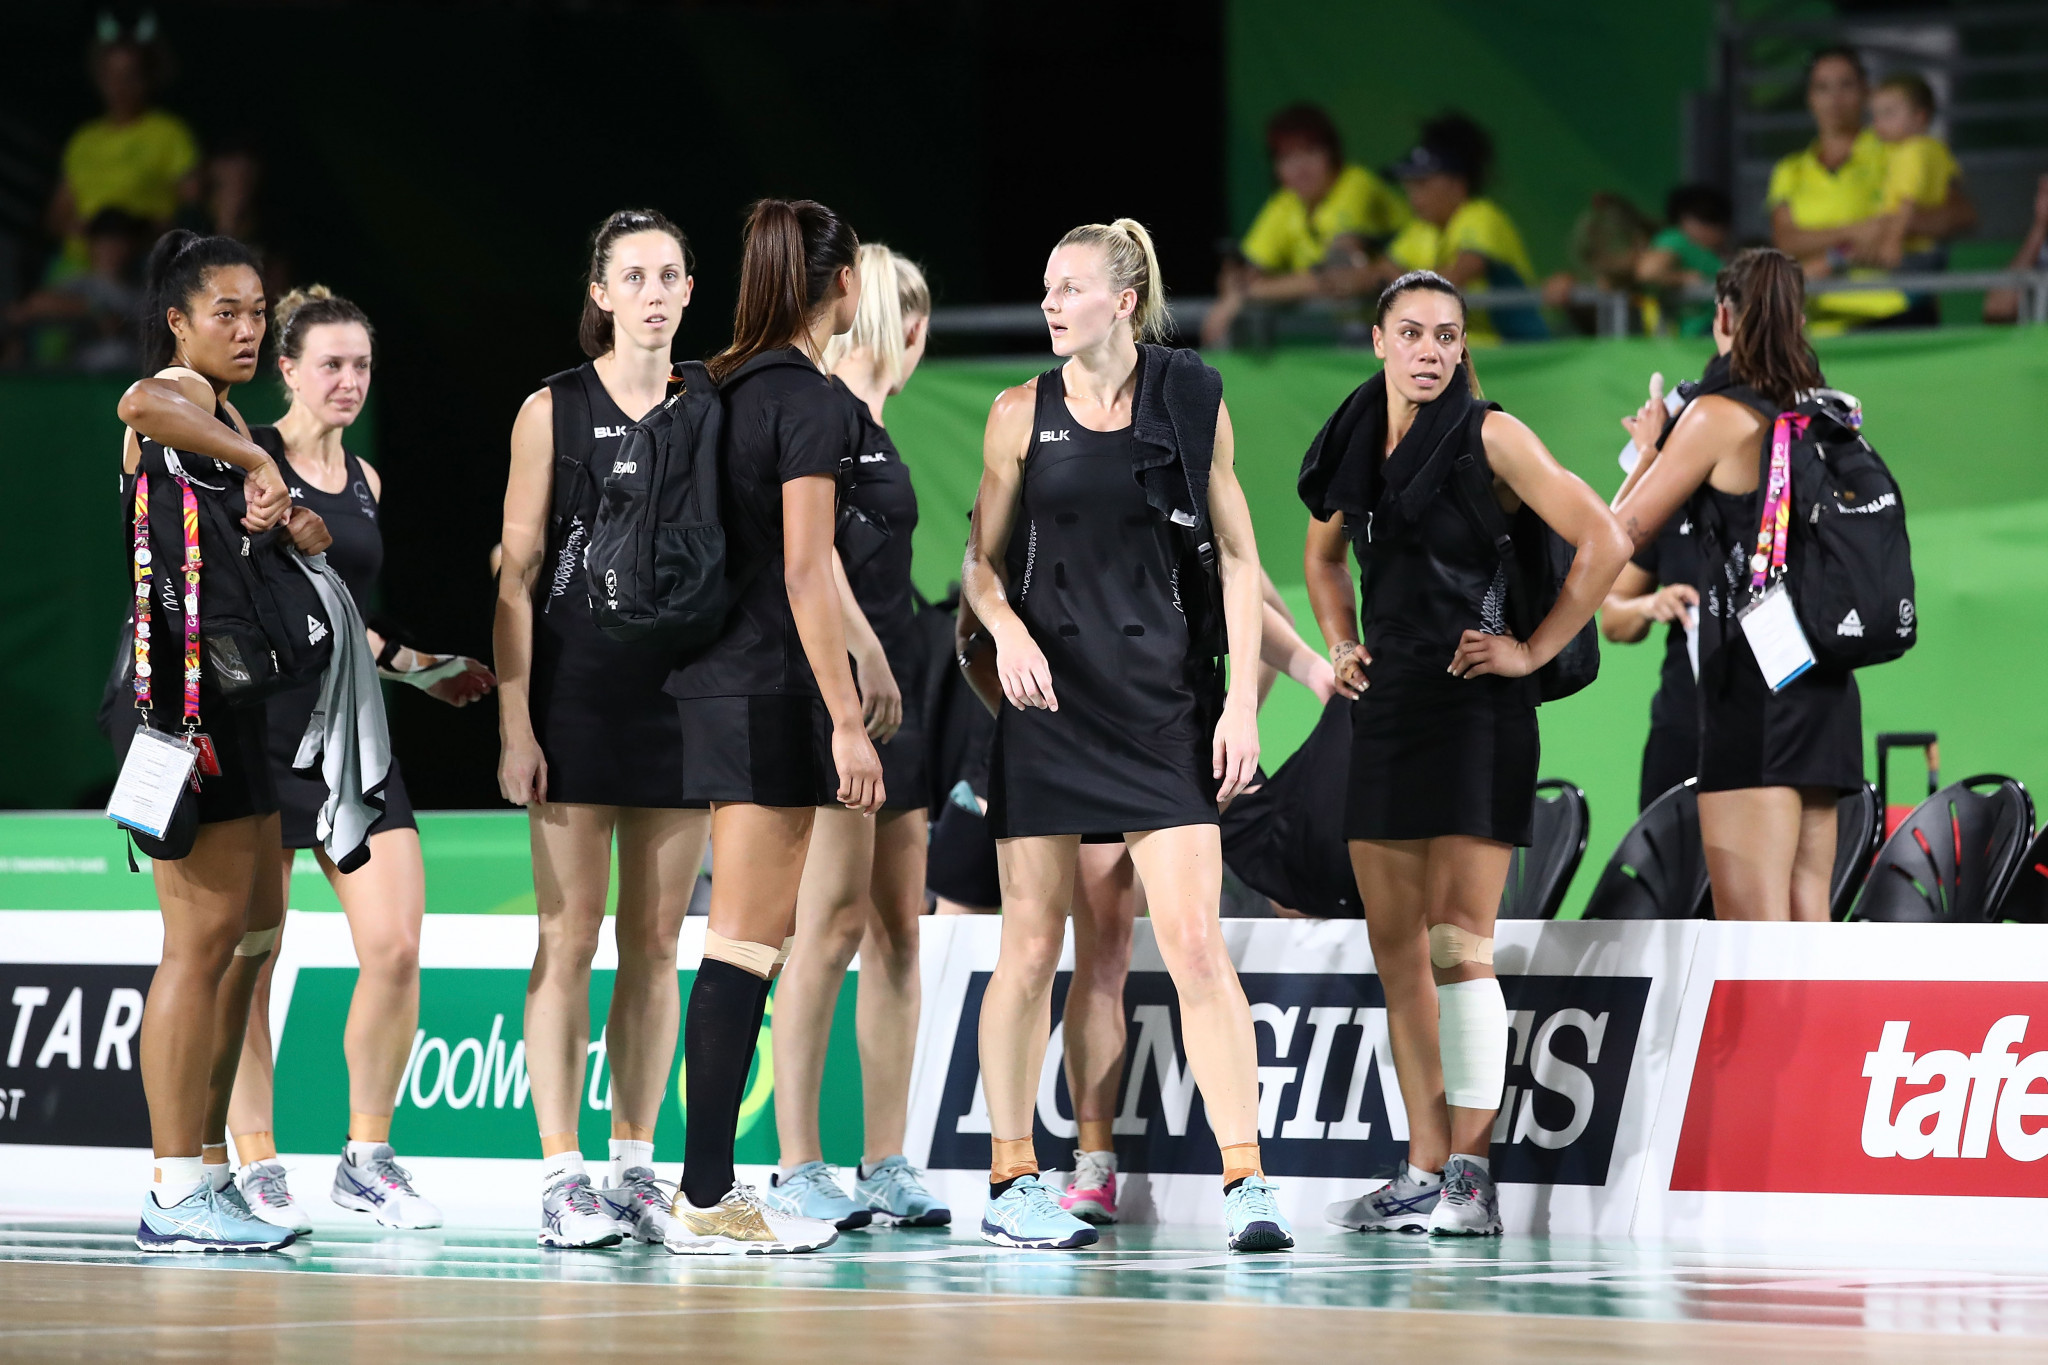 Mackinnon appointed chair of independent panel reviewing New Zealand's netball performance at Gold Coast 2018